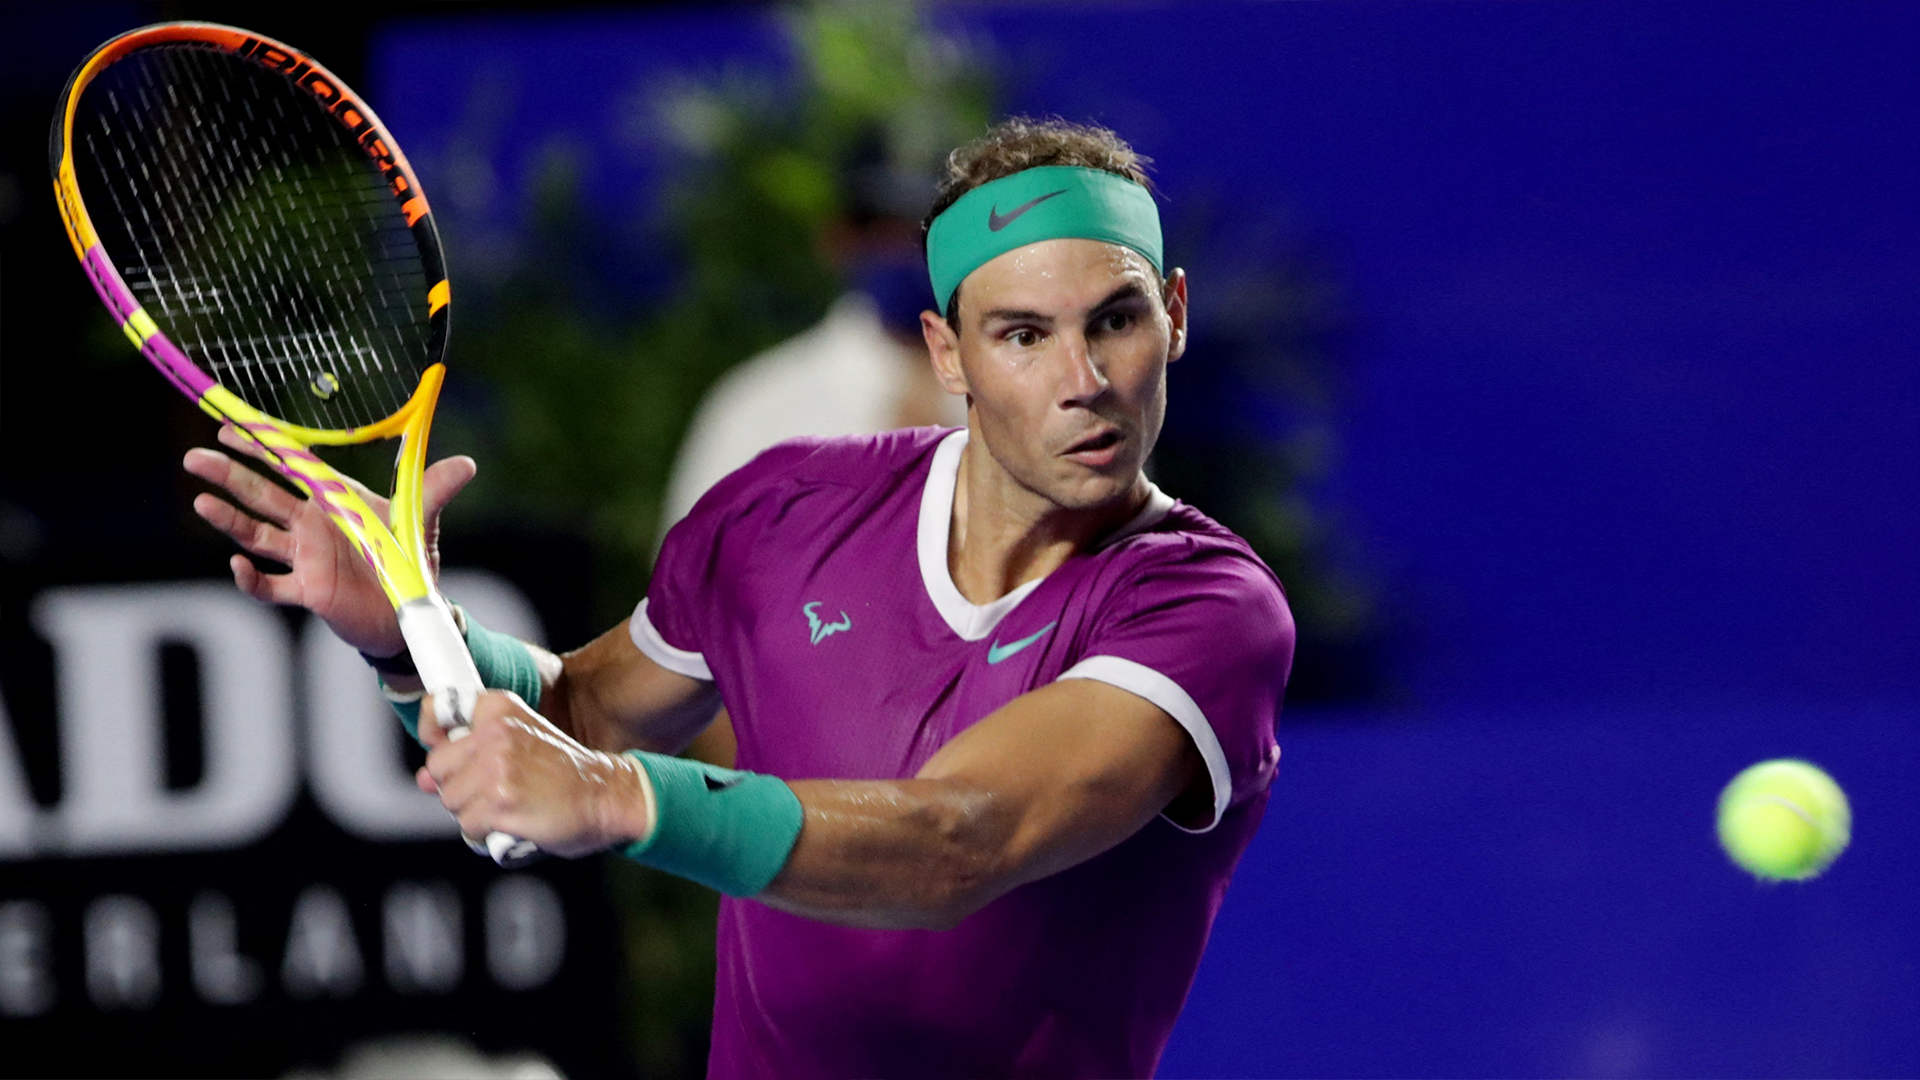 ATP Mexican Open: Nadal tops Kudla in straight sets